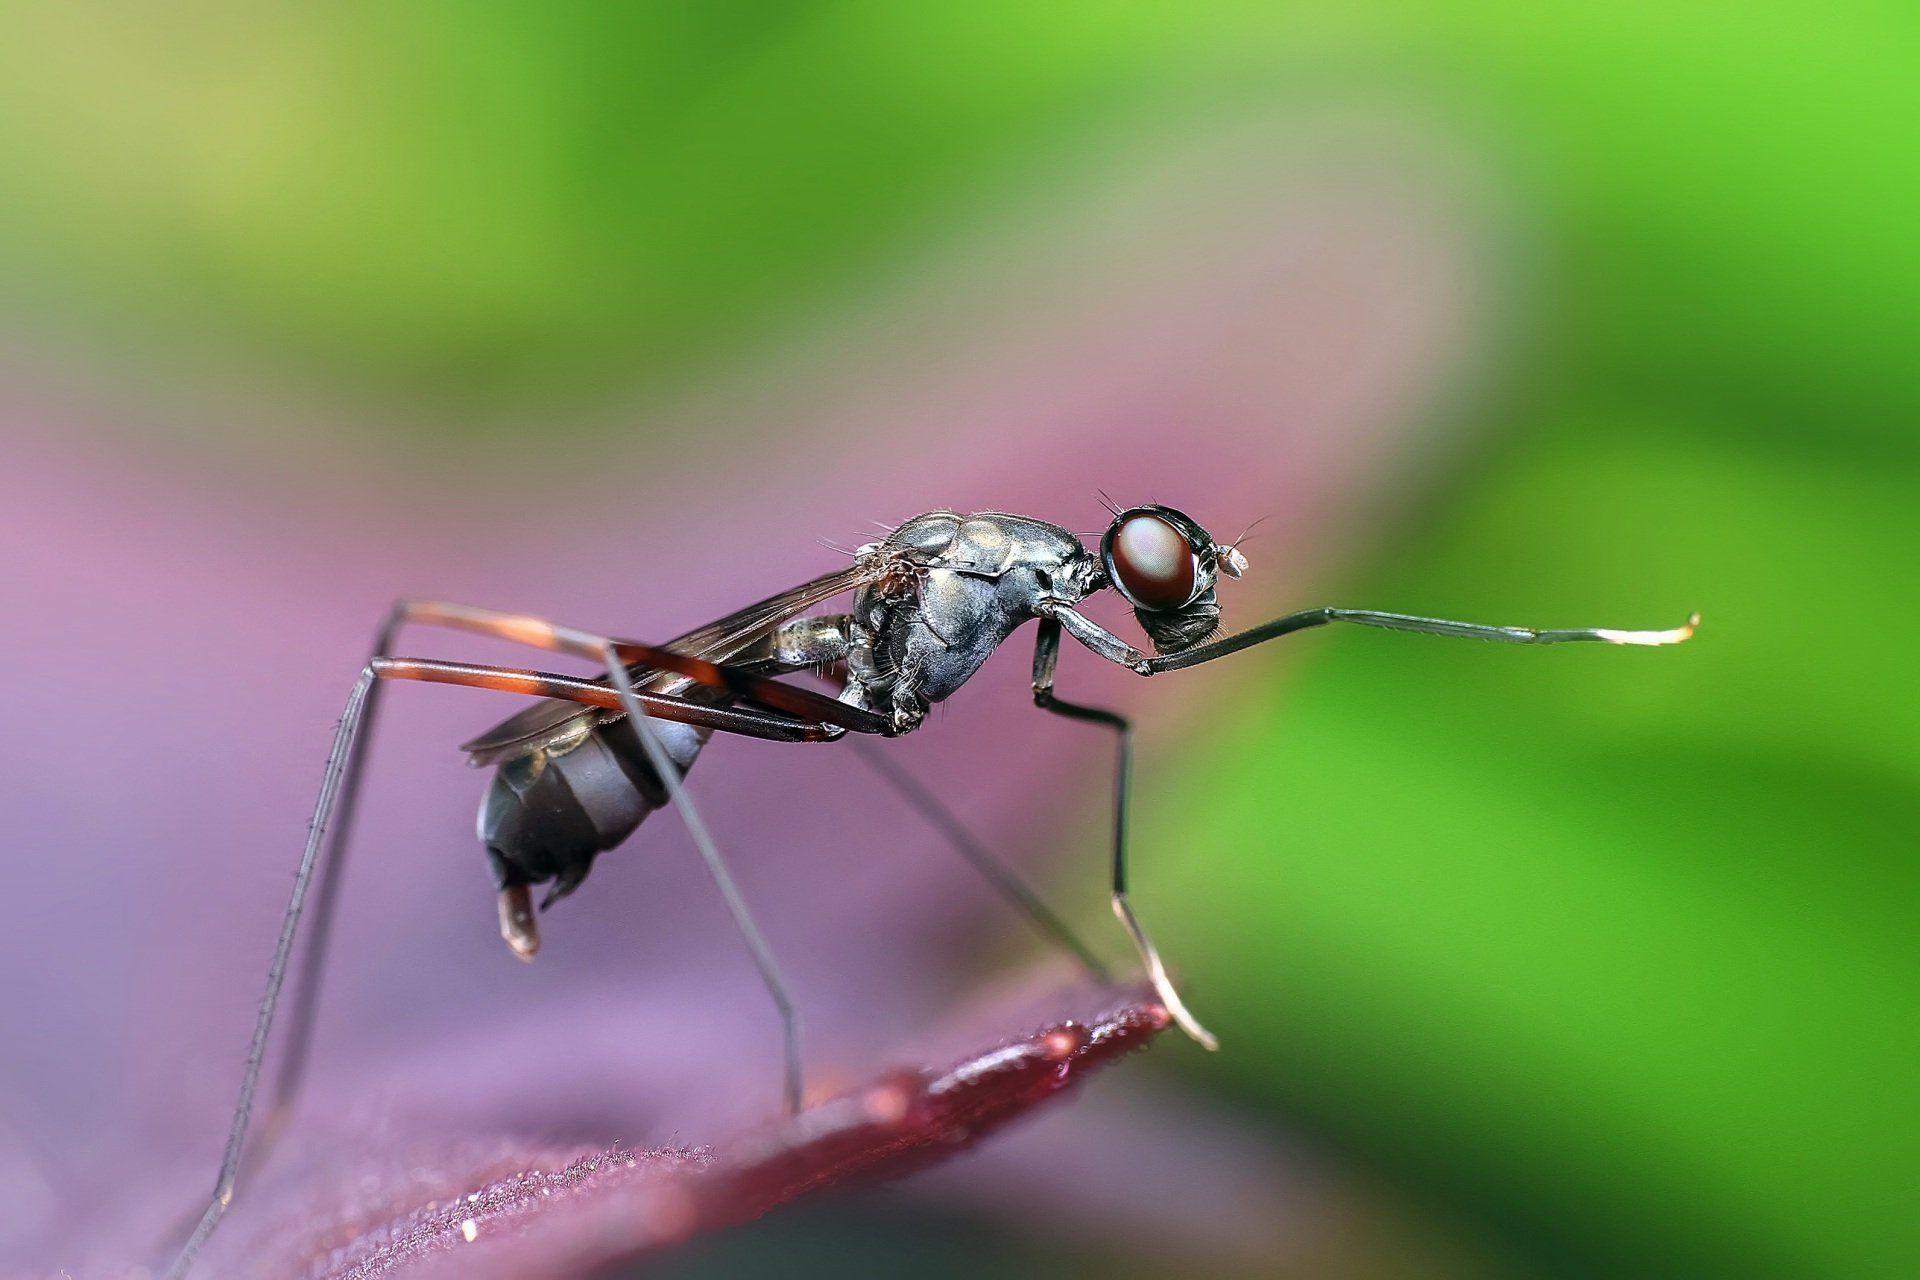 Black and white mosquito on a plant.